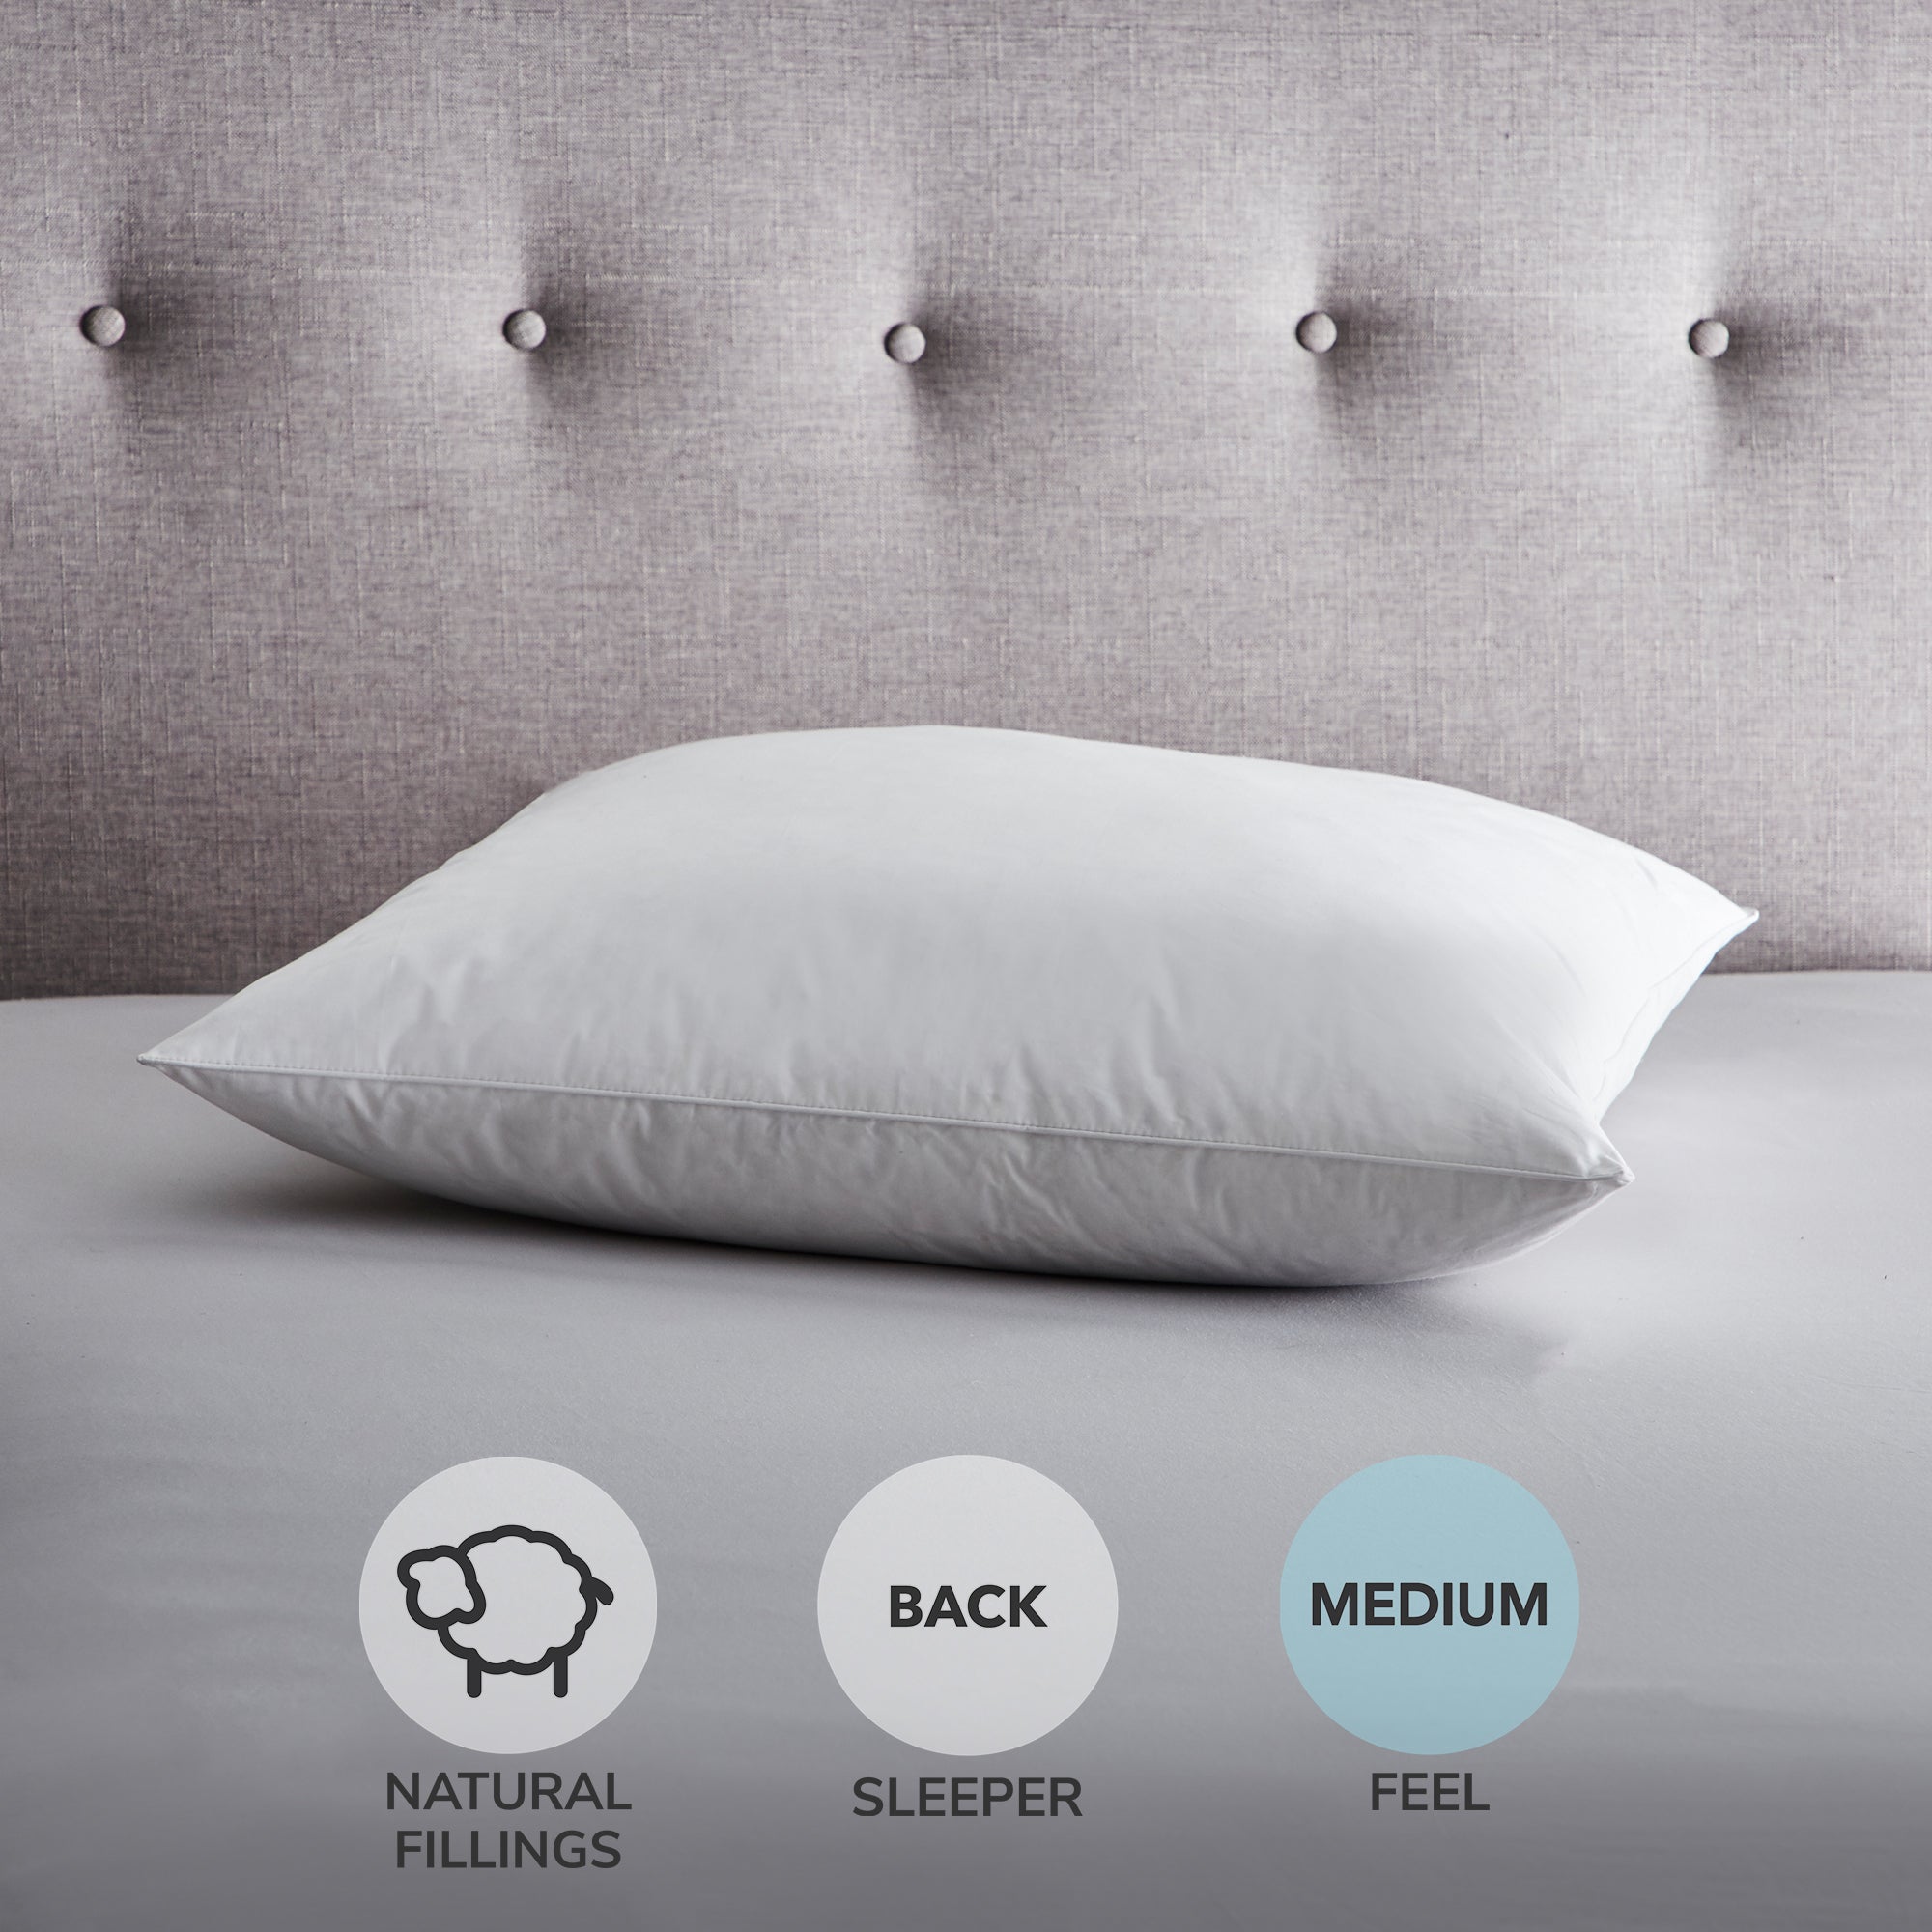 Pillows SALE - Feather & Memory Foam | Dunelm | Page 2